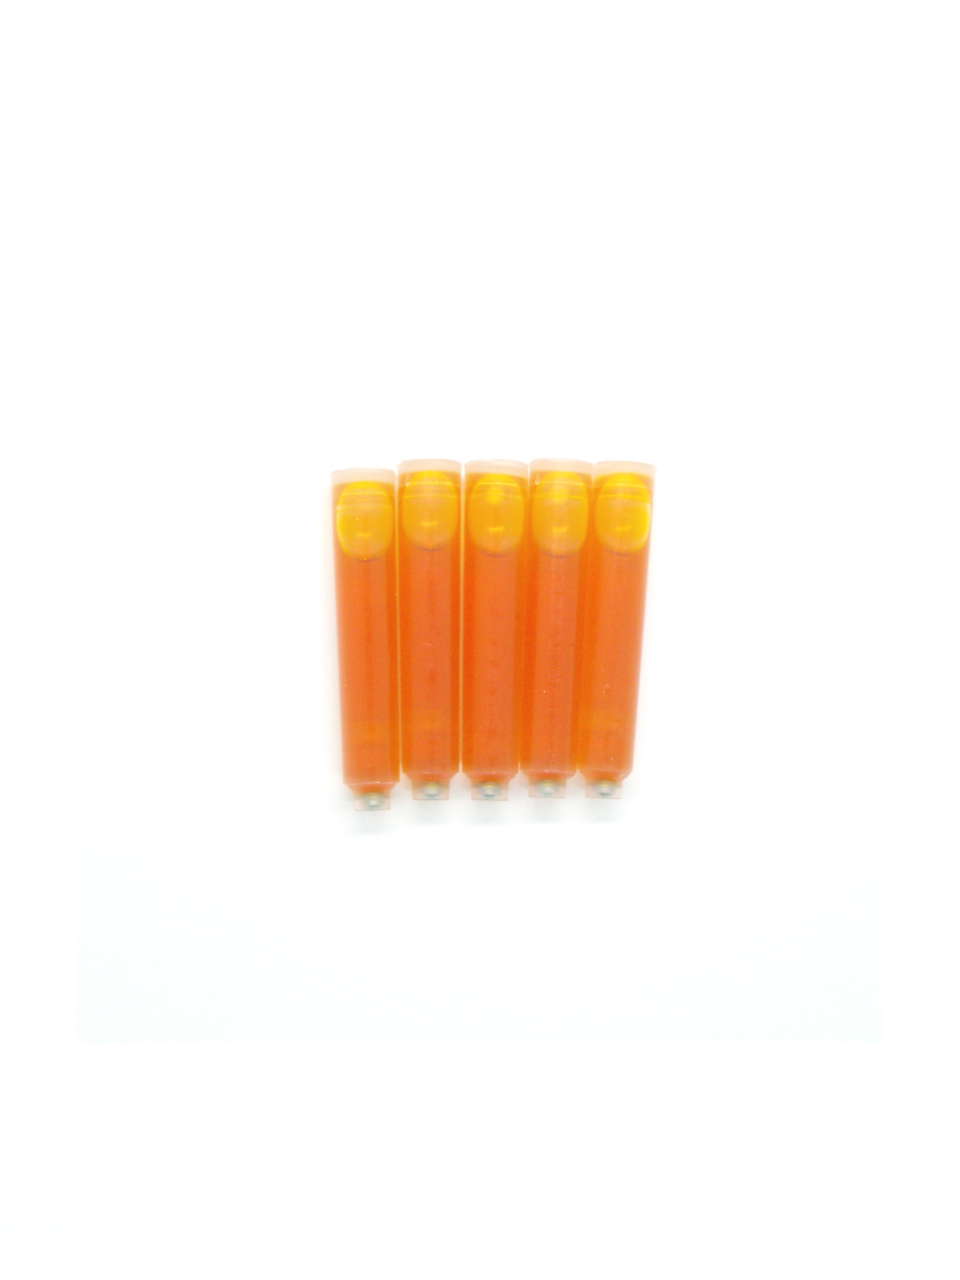 PenConverter Ink Cartridges For Ancora Fountain Pens (Yellow)